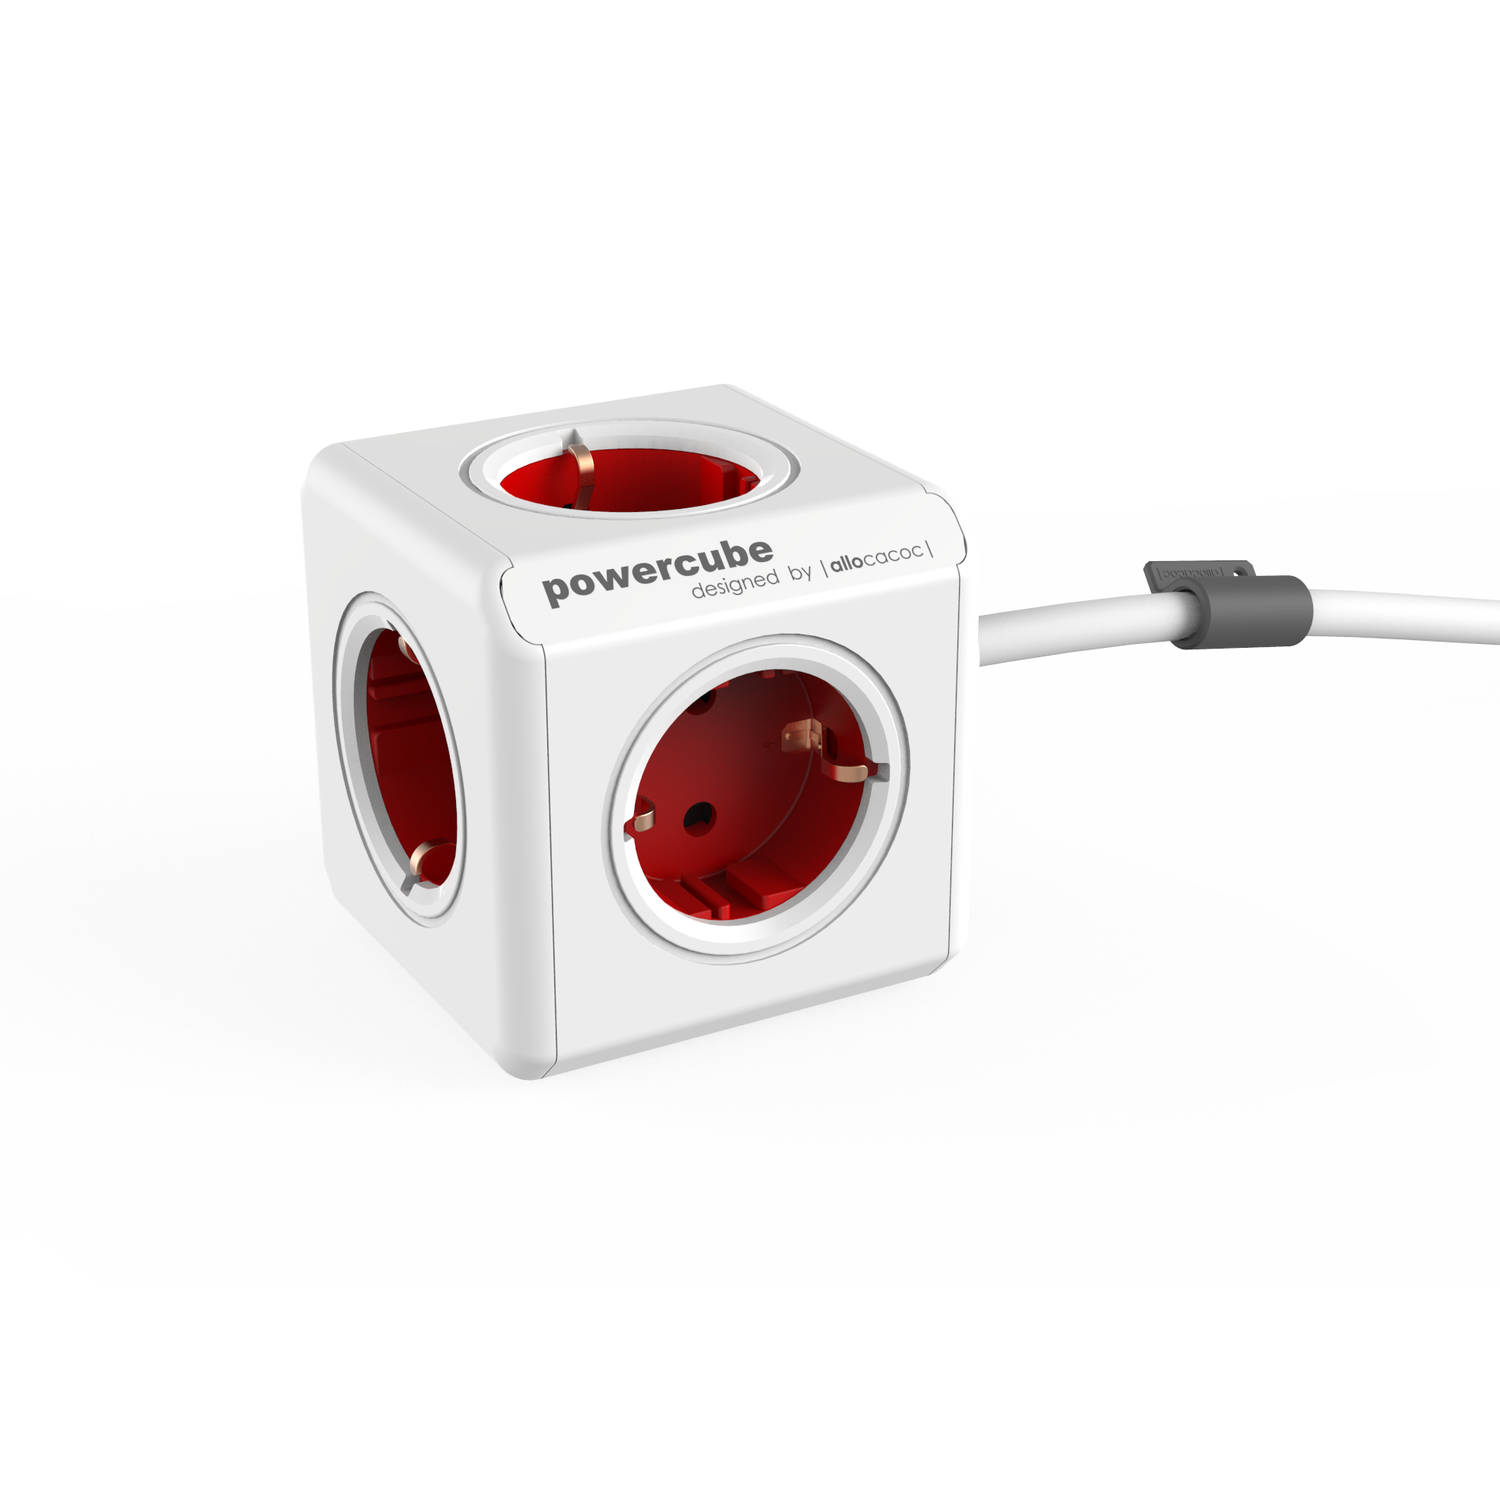 Allocacoc allocacoc PowerCube Extended 3 m incl. 3 m kabel rood Type F (1307-DEEXPC)